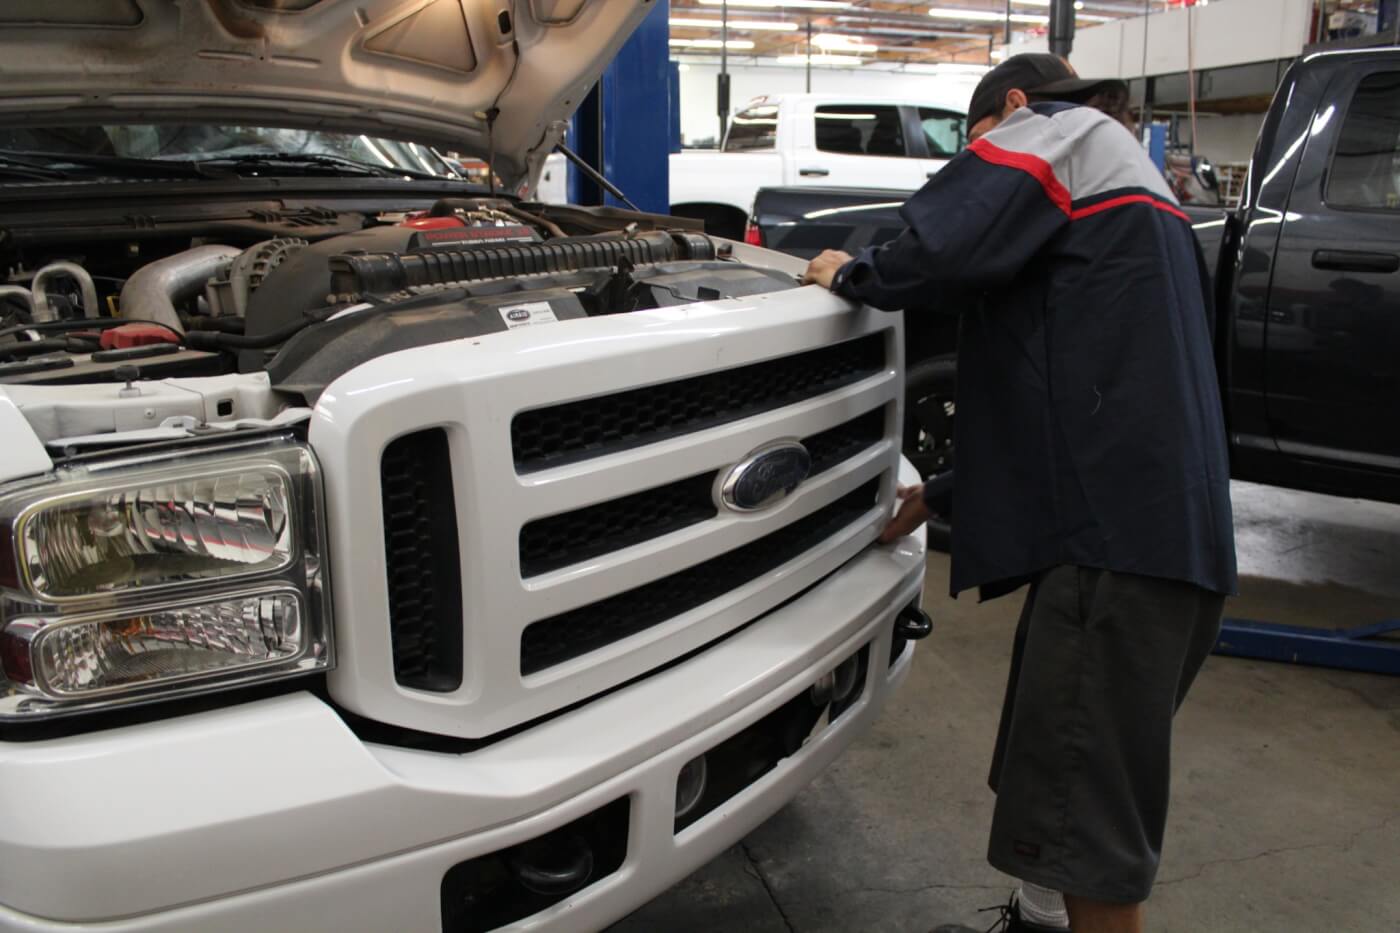 2. Just like last month's bumper installation, Brett Corder of 4Wheel Parts Wholesaler is fitting the grille to our F-250. He starts by unbolting the stock grille, which is held in place with four small bolts along the top and retaining clips along the bottom. The grille must be removed with care, as the shell will be re-used.